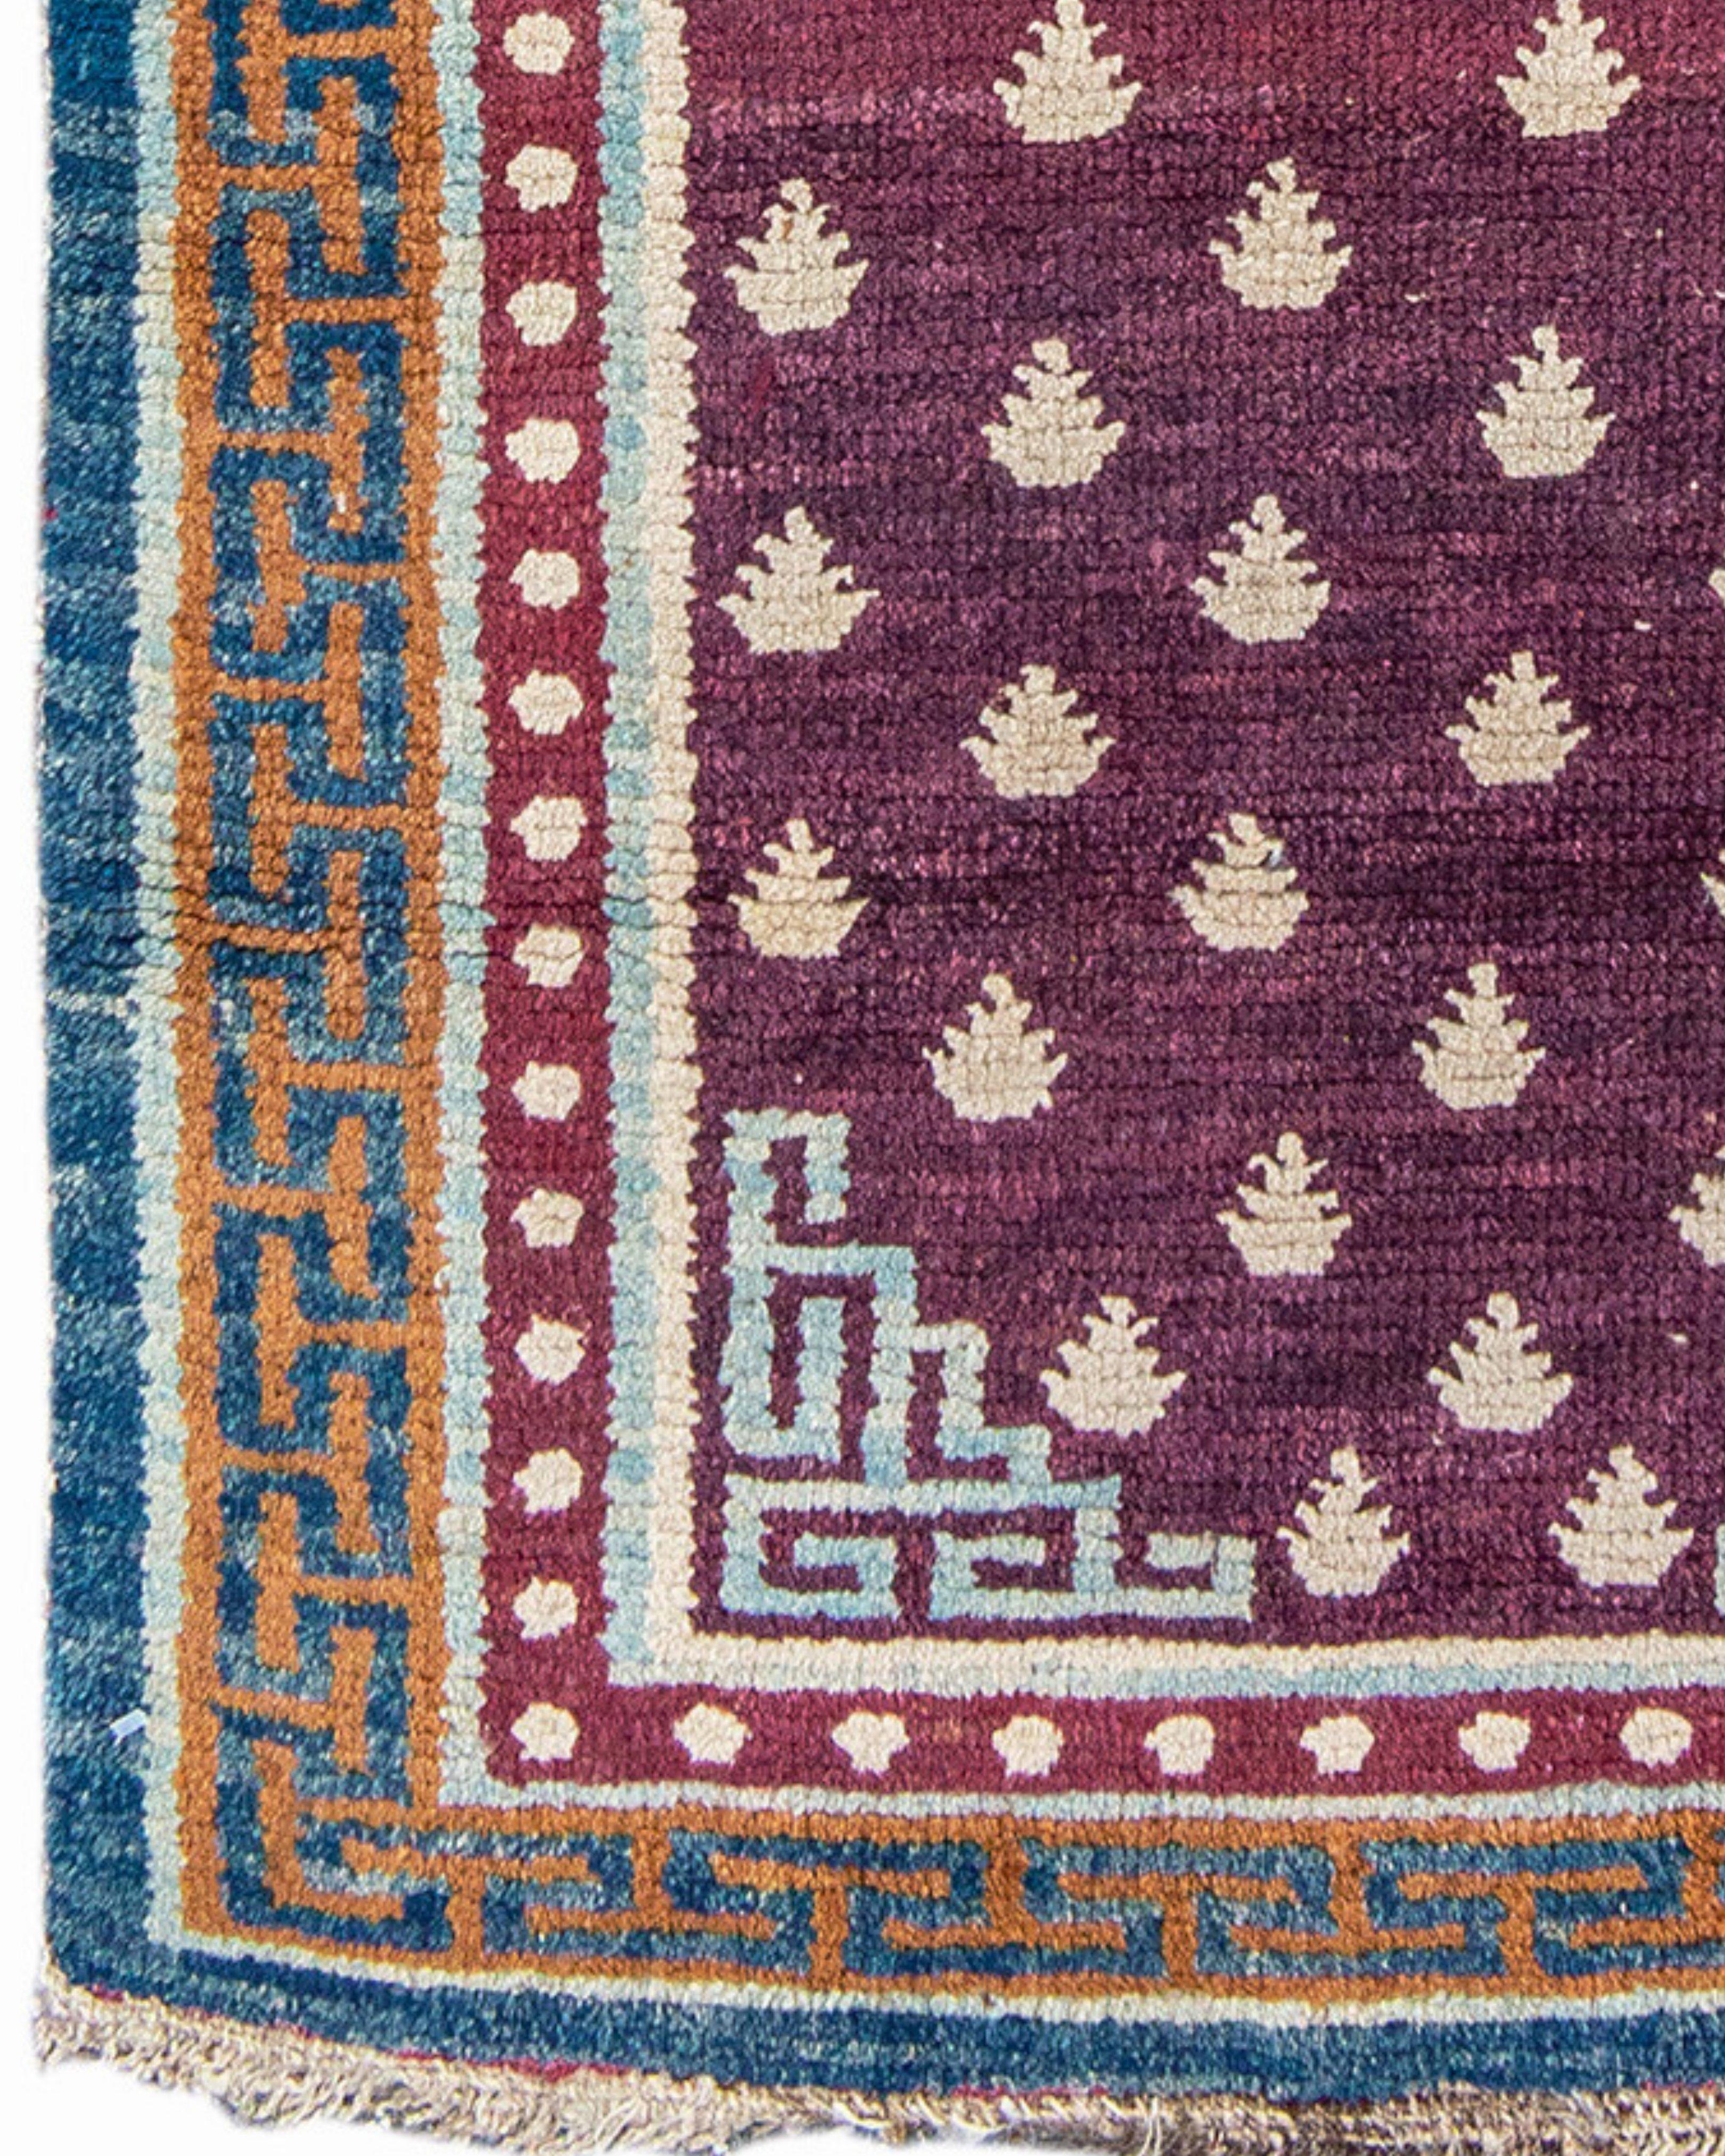 Antique Tibetan Rug, Mid-19th Century In Excellent Condition For Sale In San Francisco, CA